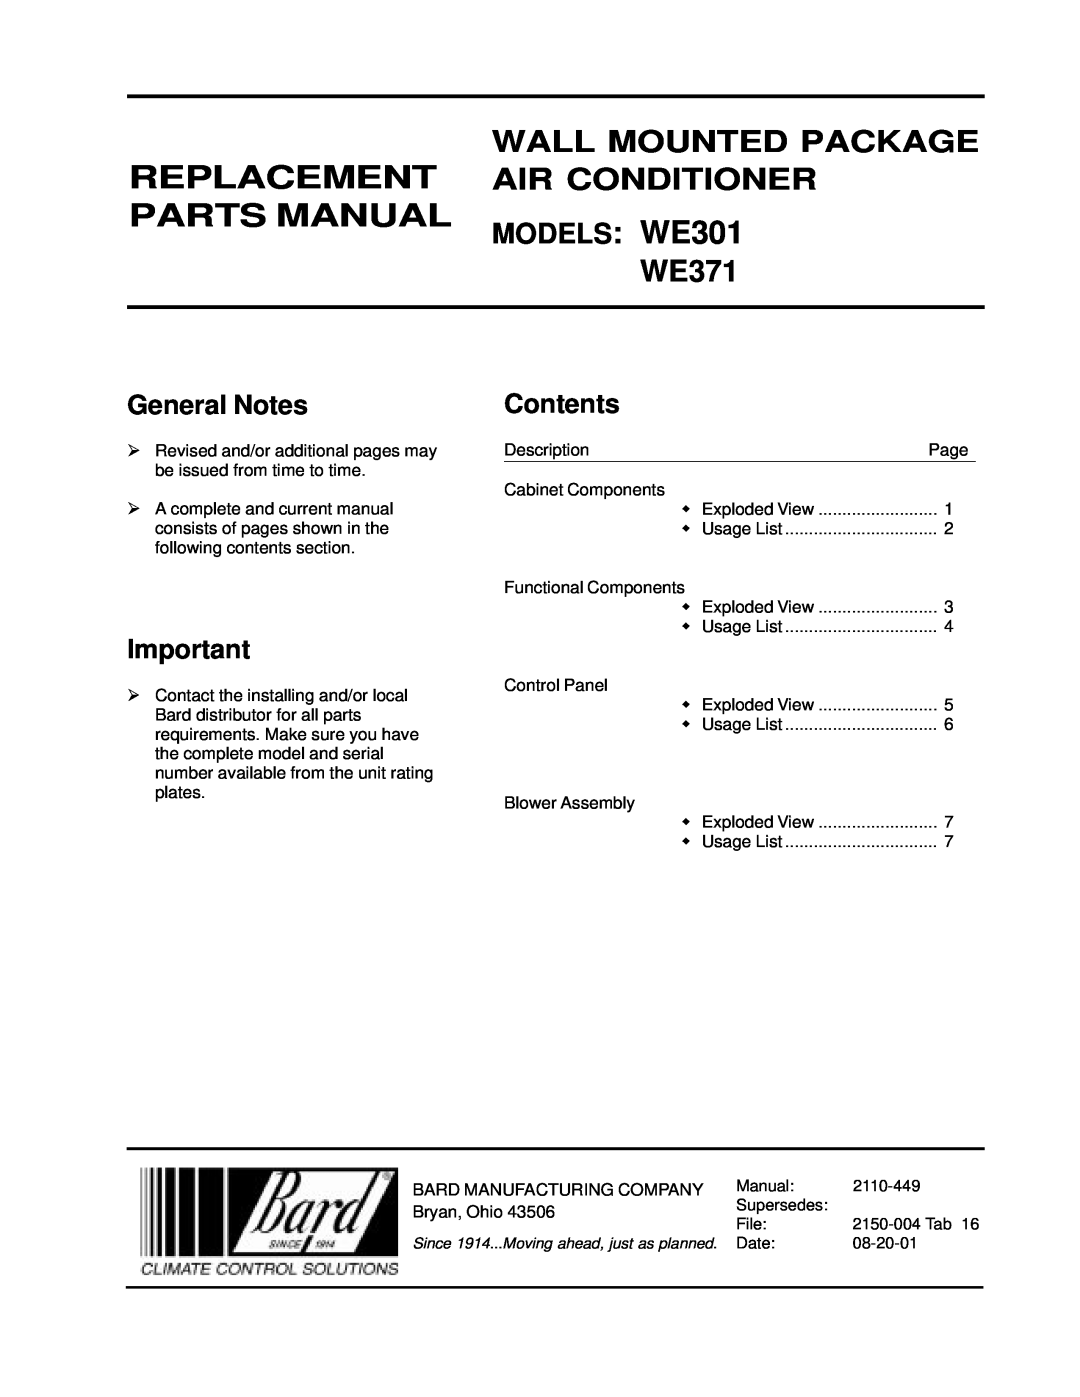 Bard WE371 manual Parts Manual, MODELS WE301, Wall Mounted Package Replacement Air Conditioner, General Notes, Contents 